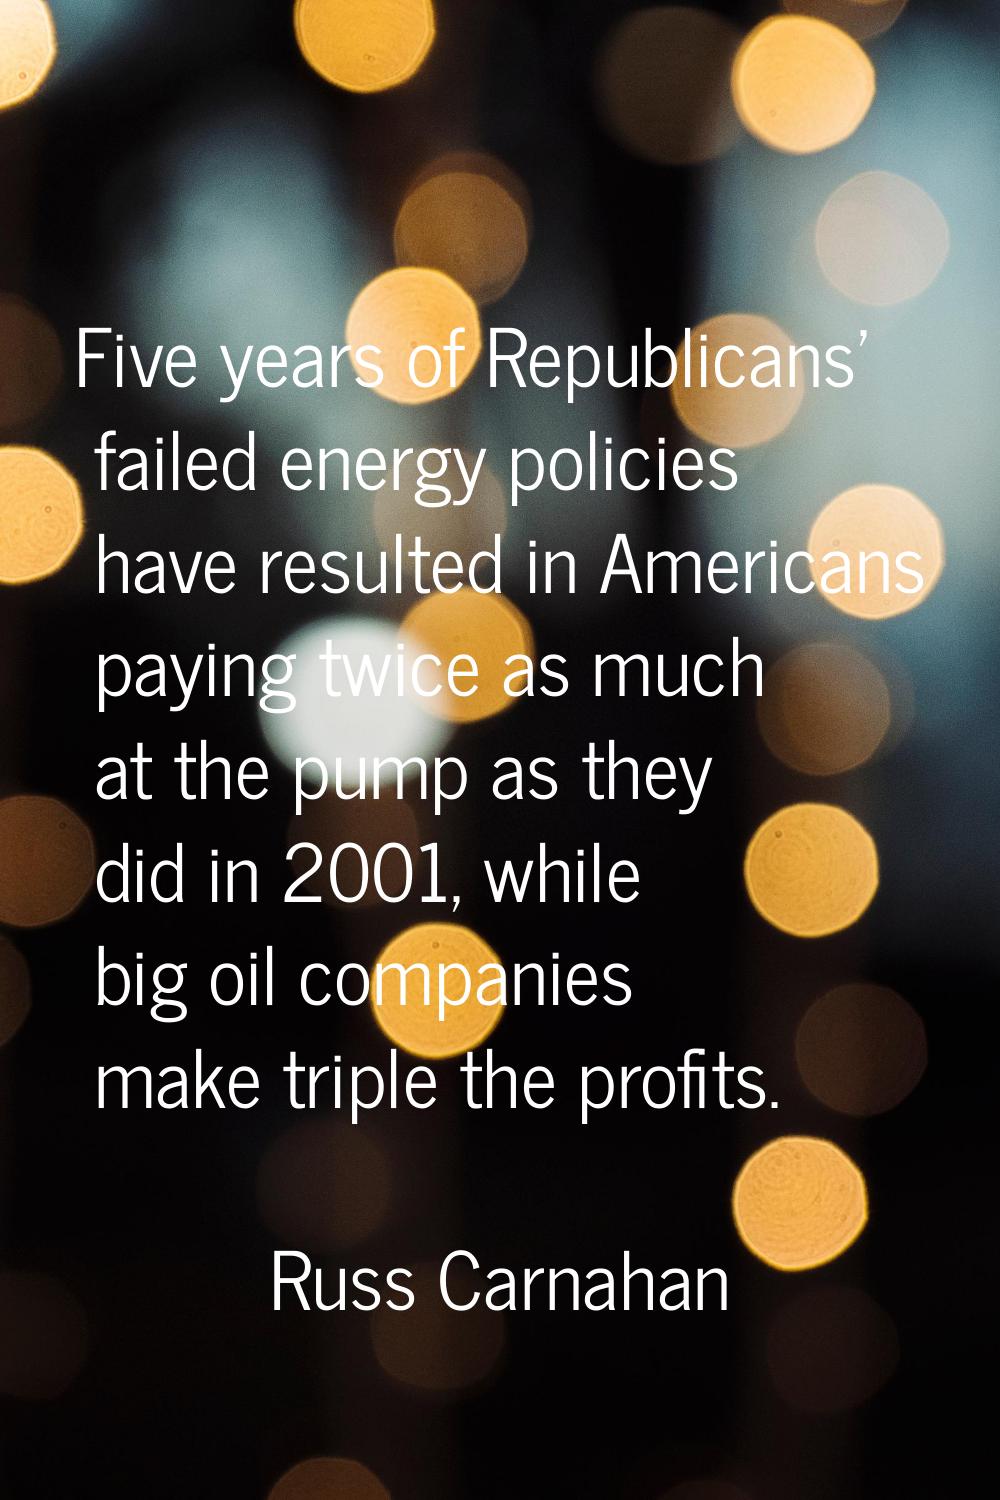 Five years of Republicans' failed energy policies have resulted in Americans paying twice as much a